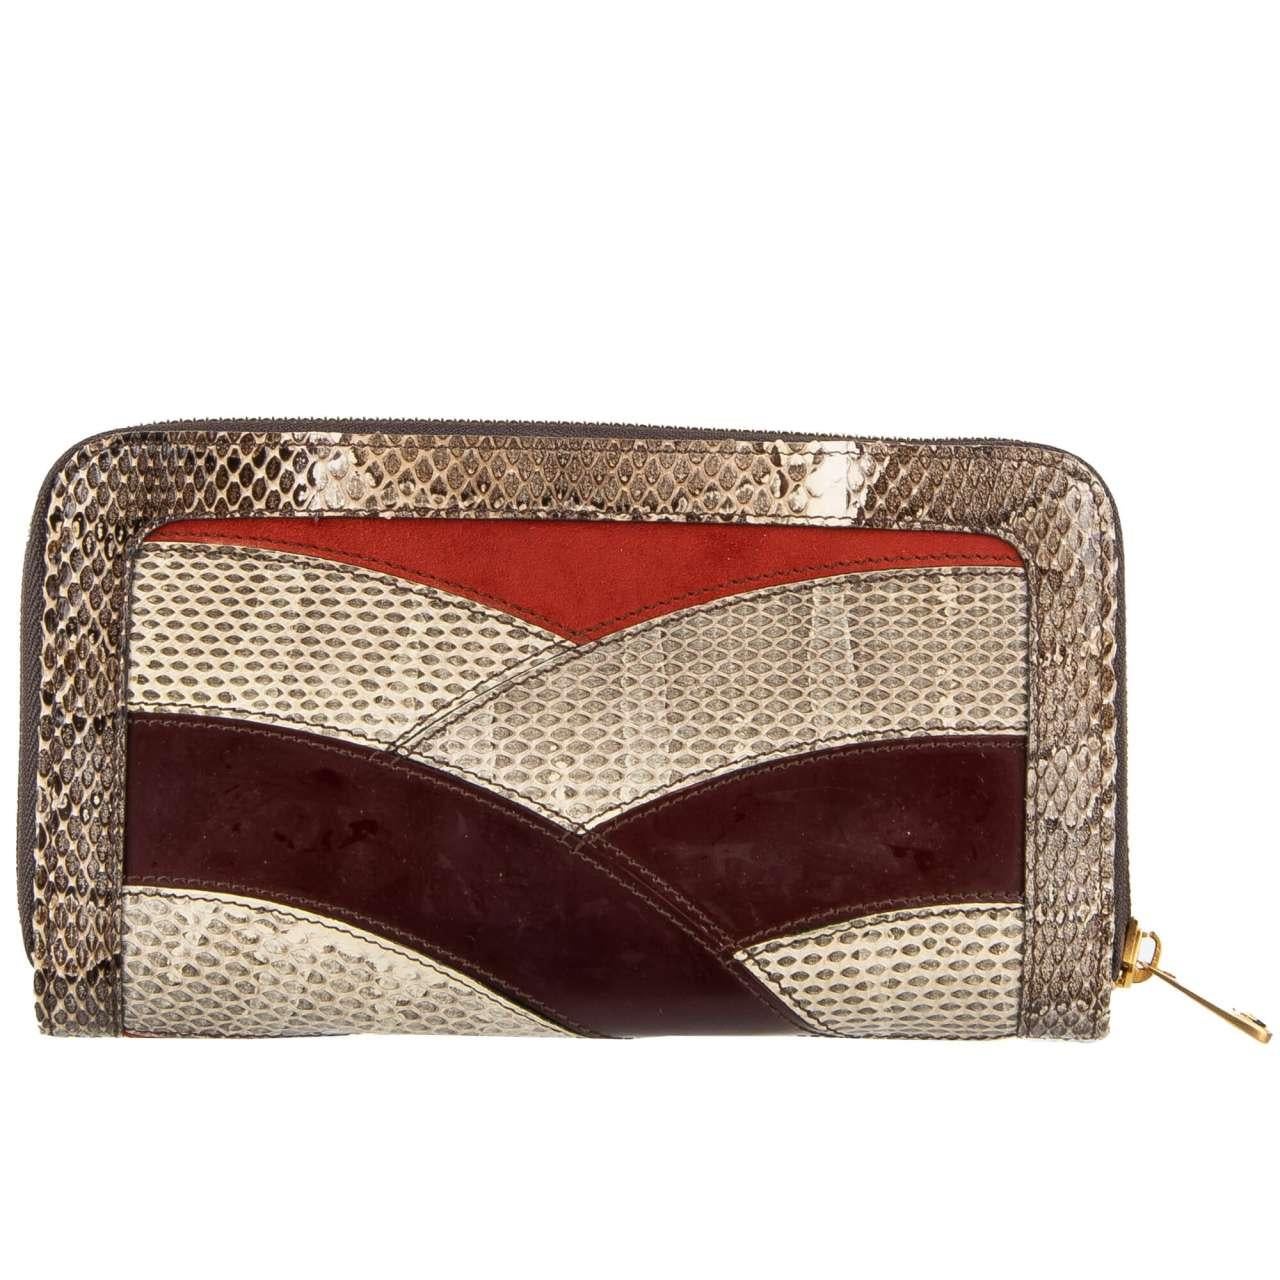 - Patchwork Zip-Around wallet made of snakeskin, suede and leather in beige, red and brown by DOLCE & GABBANA - New with Tag and Authenticity Card - MADE IN ITALY - Former RRP: EUR 595 - Model: BI0473-A8341-8C360 - Material: 60% Snakeskin (Ayers),